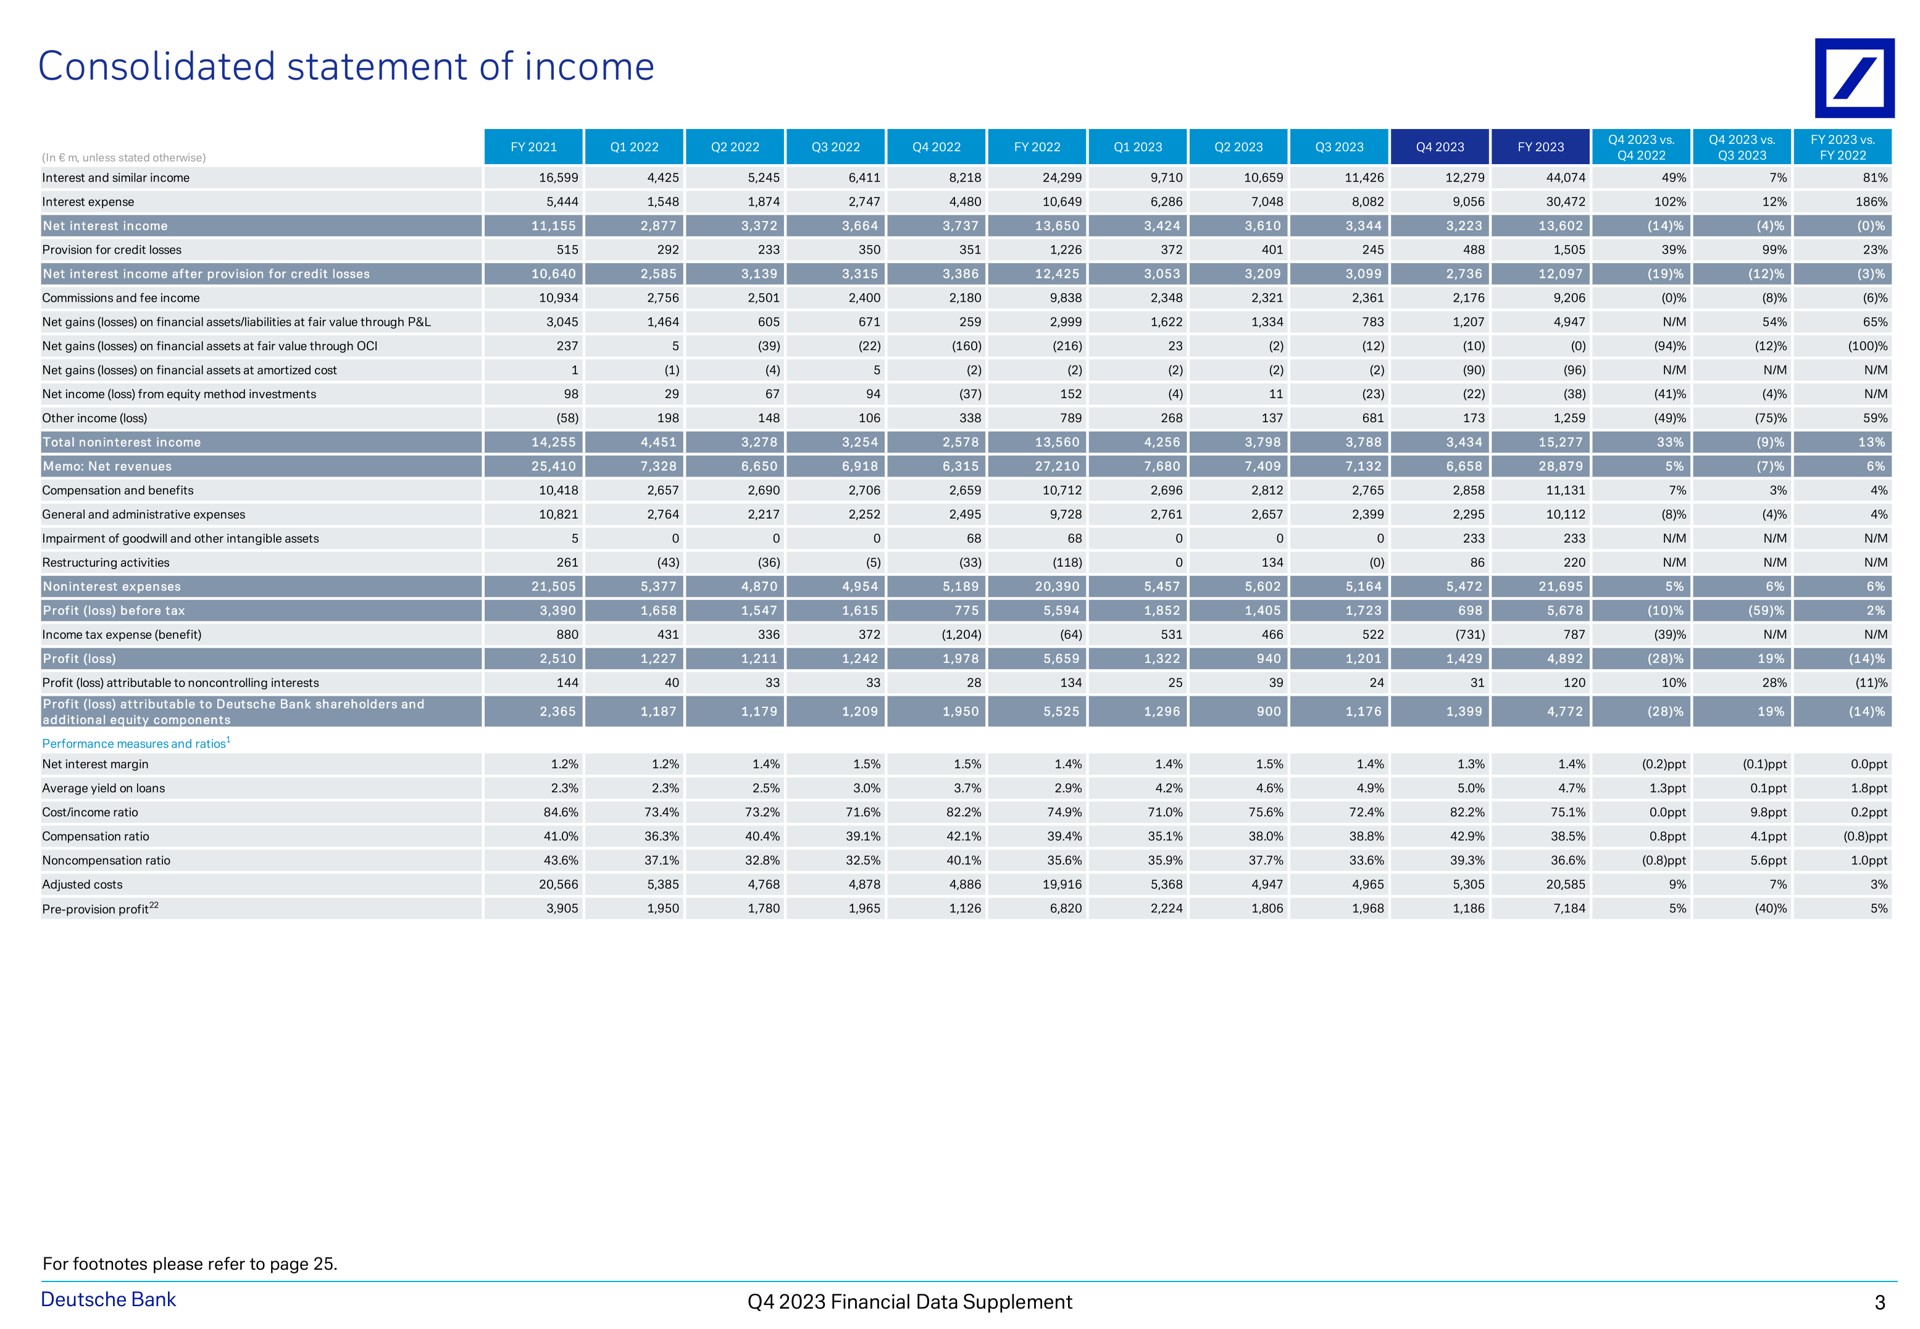 consolidated statement of income a bank financial data supplement | Deutsche Bank